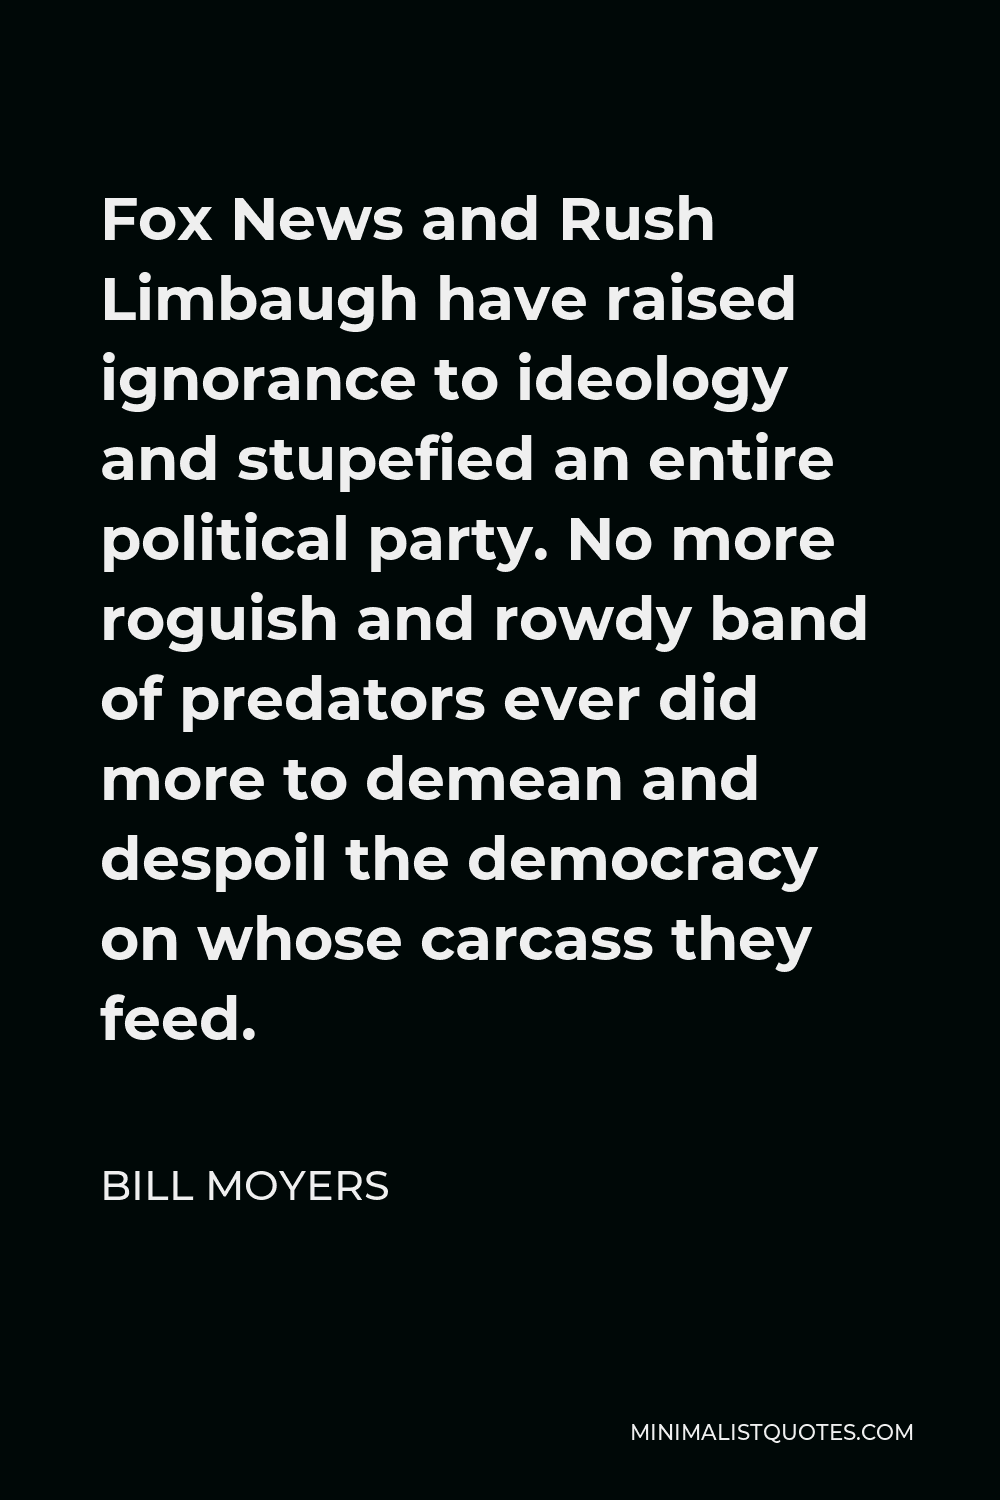 Bill Moyers Quote - Fox News and Rush Limbaugh have raised ignorance to ideology and stupefied an entire political party. No more roguish and rowdy band of predators ever did more to demean and despoil the democracy on whose carcass they feed.